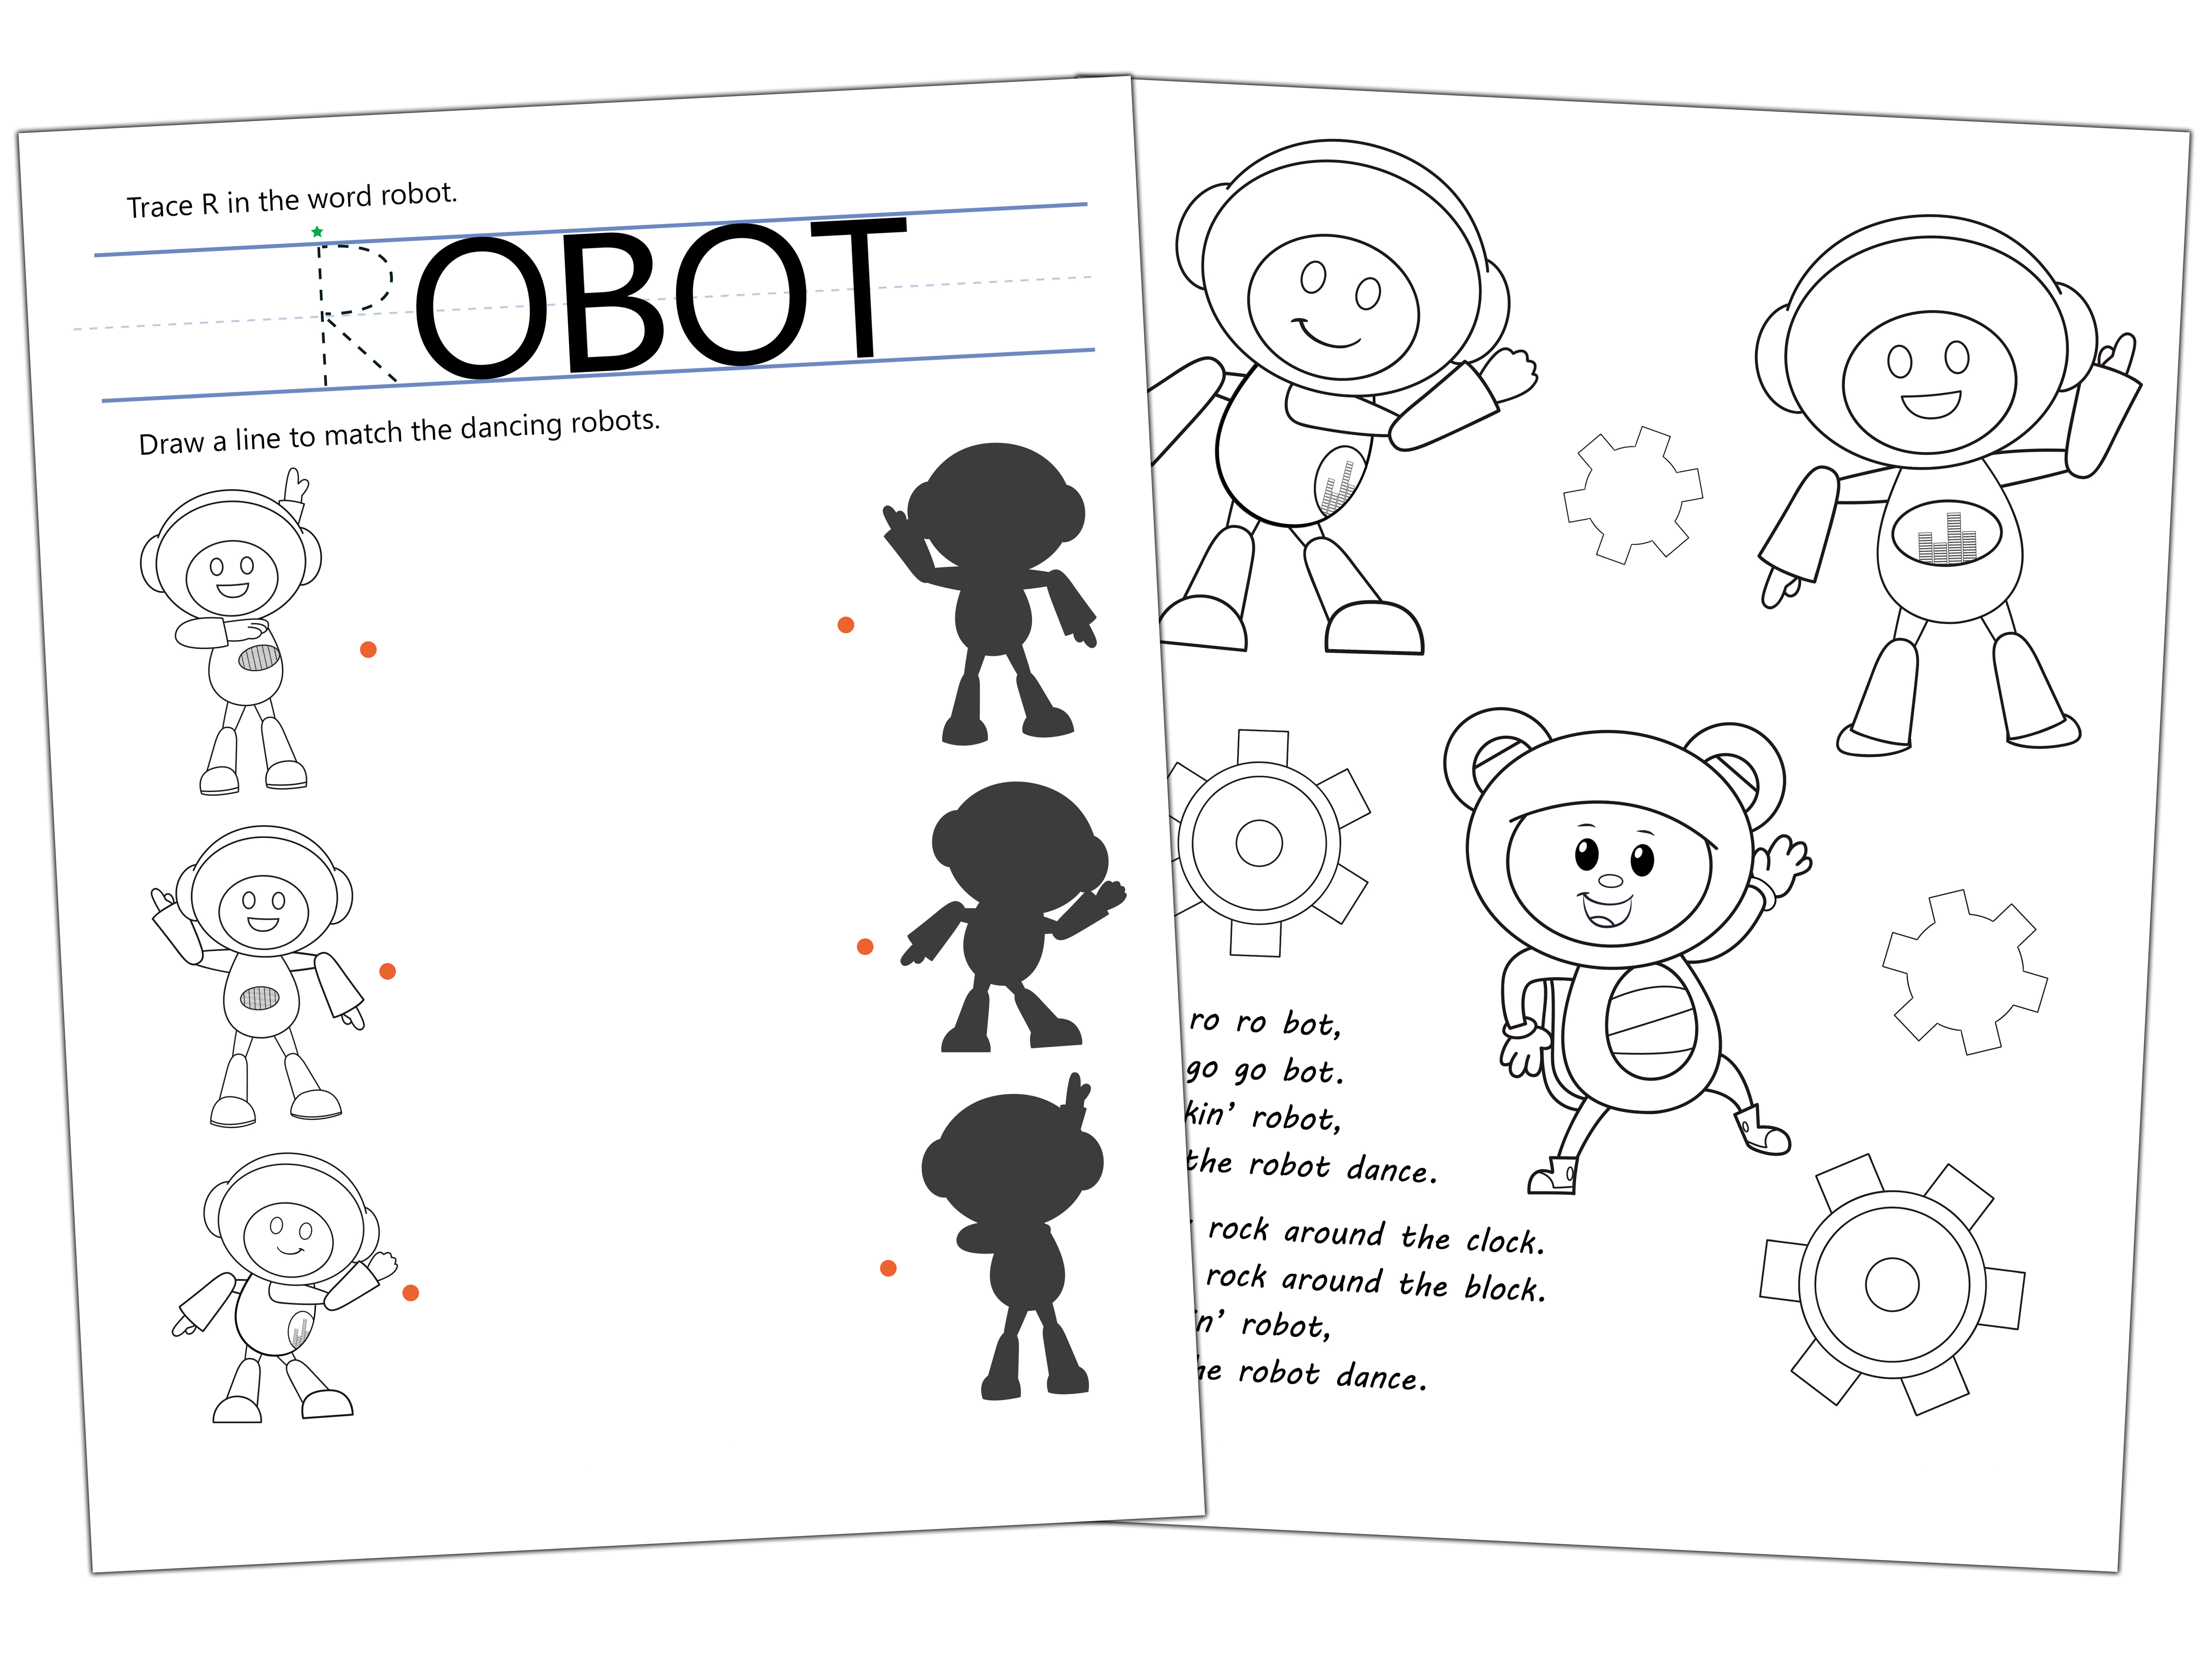 Complete the Activity Book